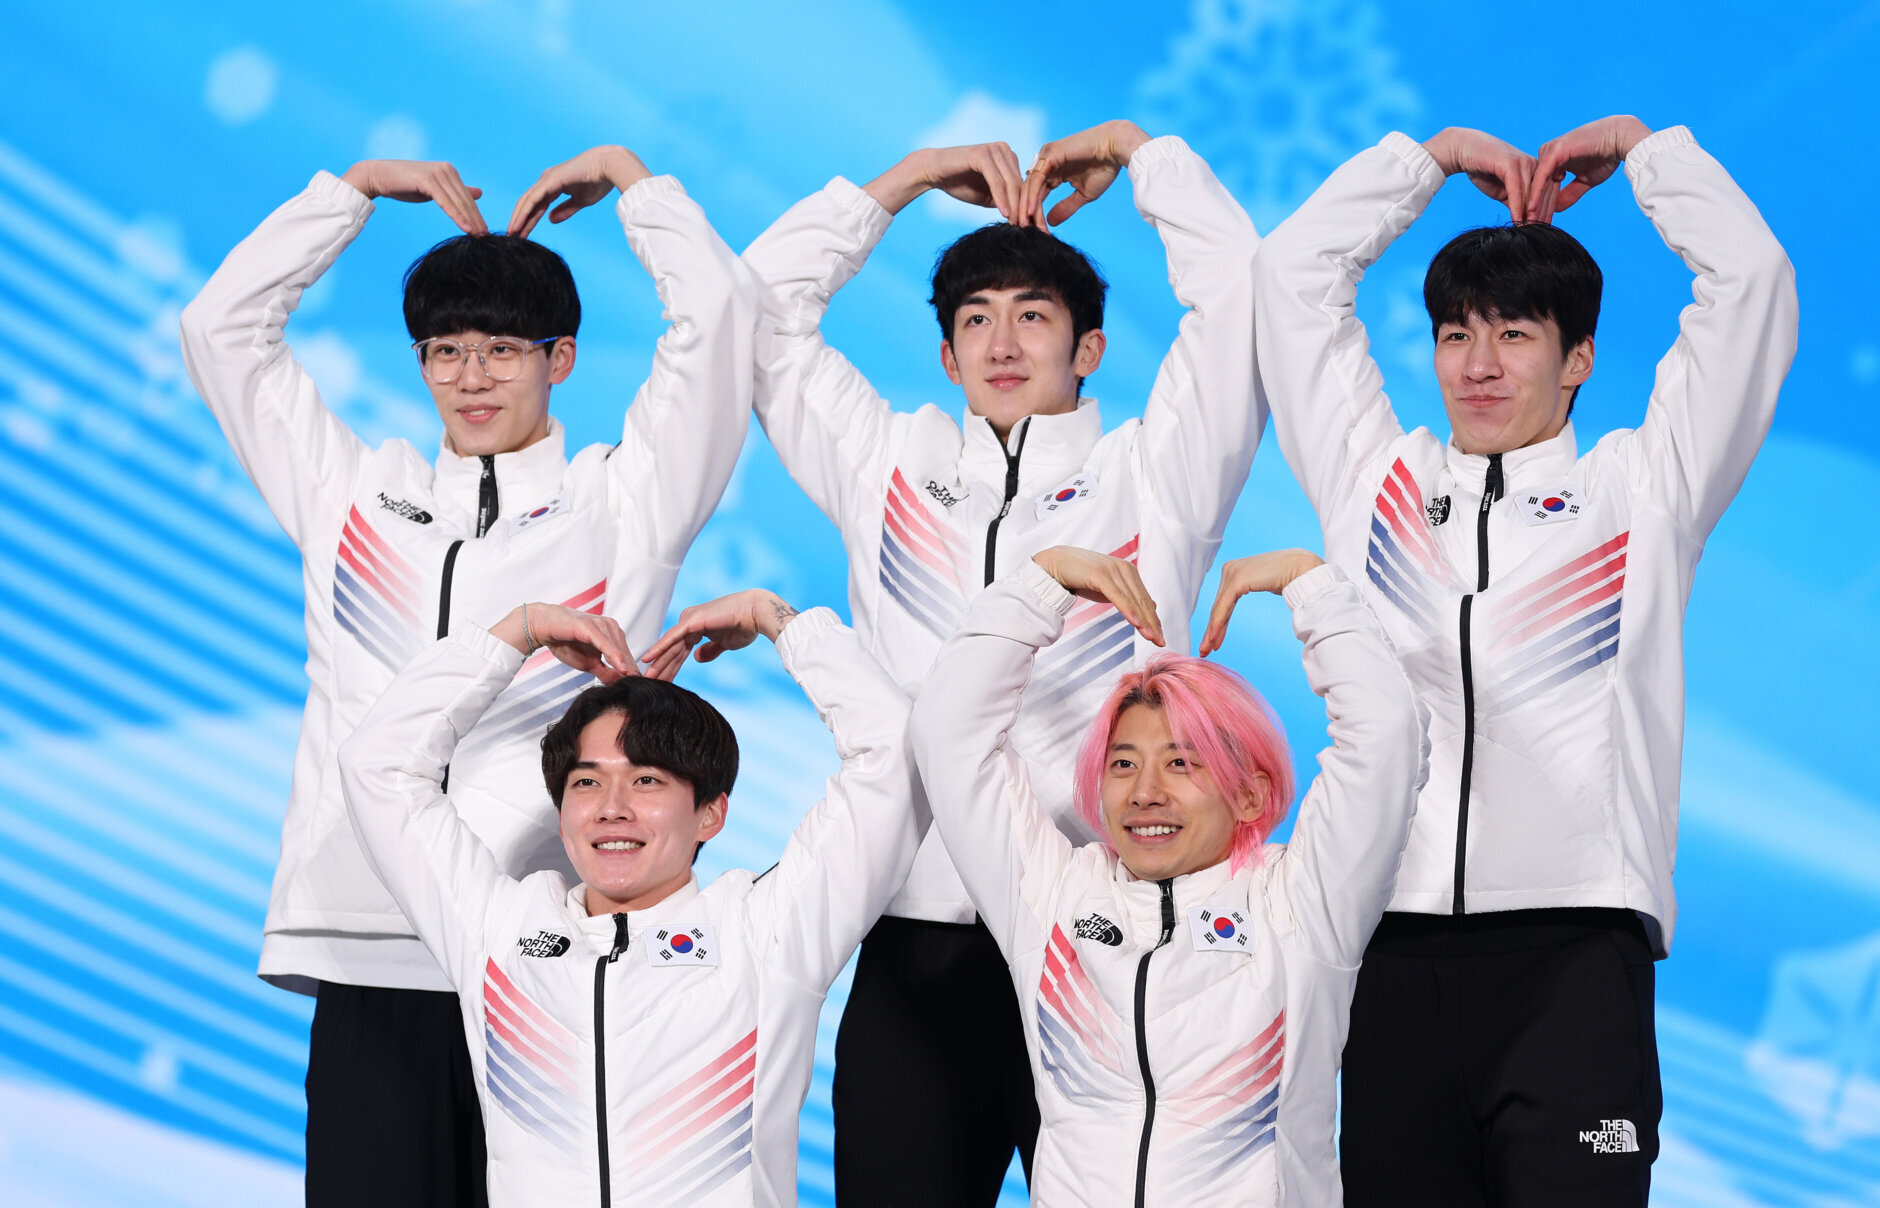 BEIJING, CHINA - FEBRUARY 17: Silver Medallists Juneseo Lee, Daeheon Hwang, Yoongy Kwak, Dongwook Kim and Janghyuk Park of Team South Korea celebrate during the Men's 5000m Relay medal ceremony on Day 13 of the Beijing 2022 Winter Olympics at Medal Plaza on February 17, 2022 in Beijing, China. (Photo by Sarah Stier/Getty Images)